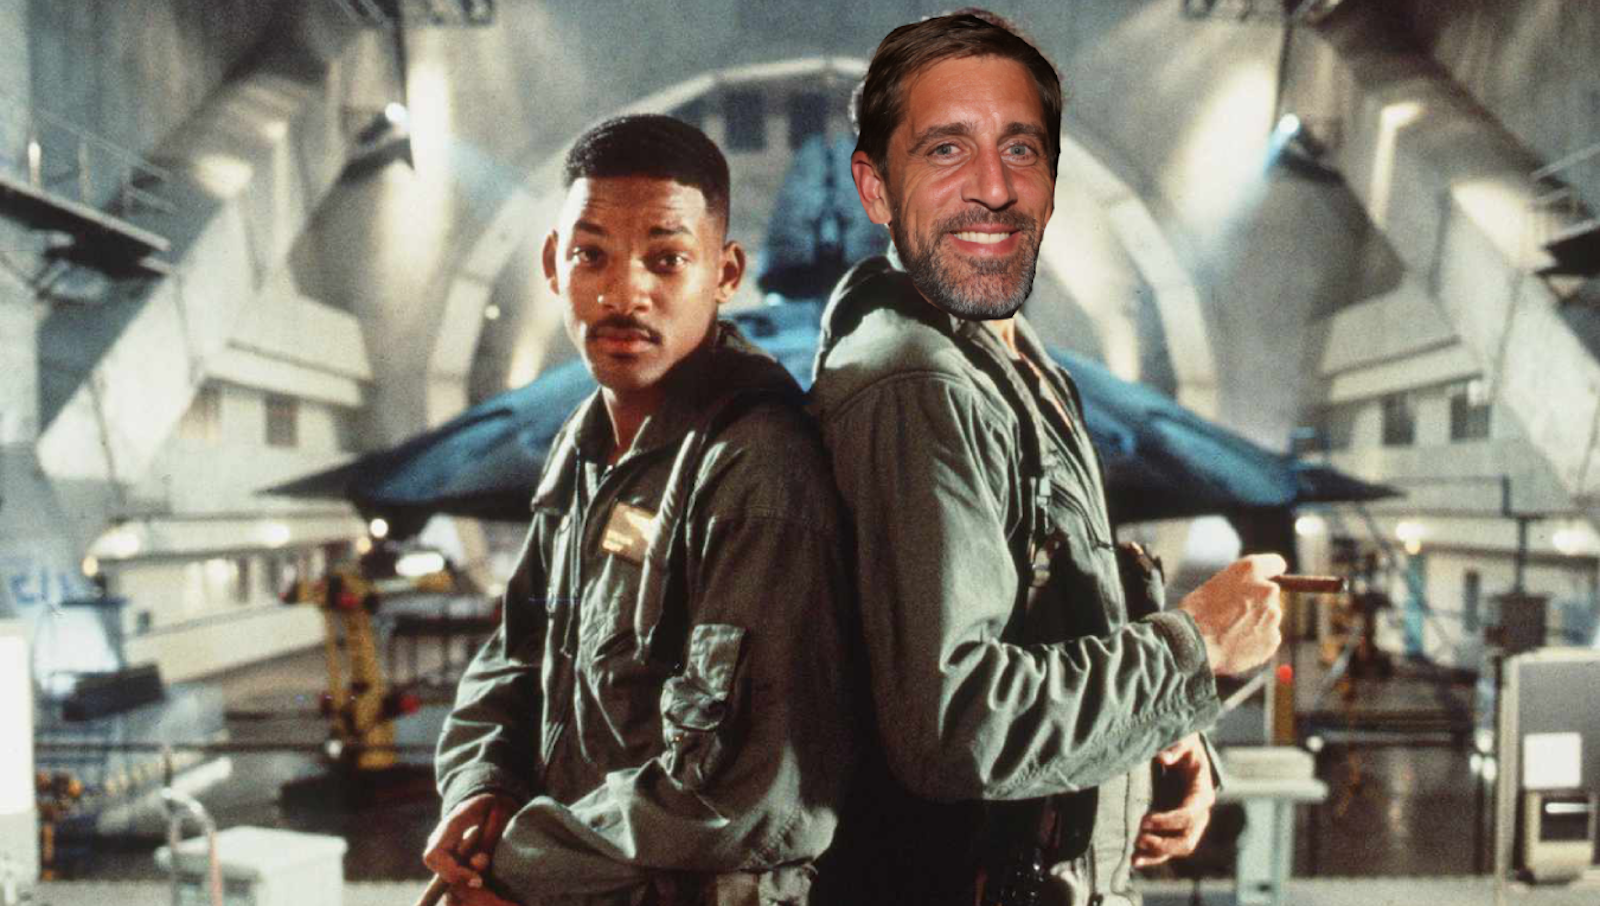 Aaron Rodgers Claims He Saw A UFO, Says It Was Like Being In ‘Independence Day’